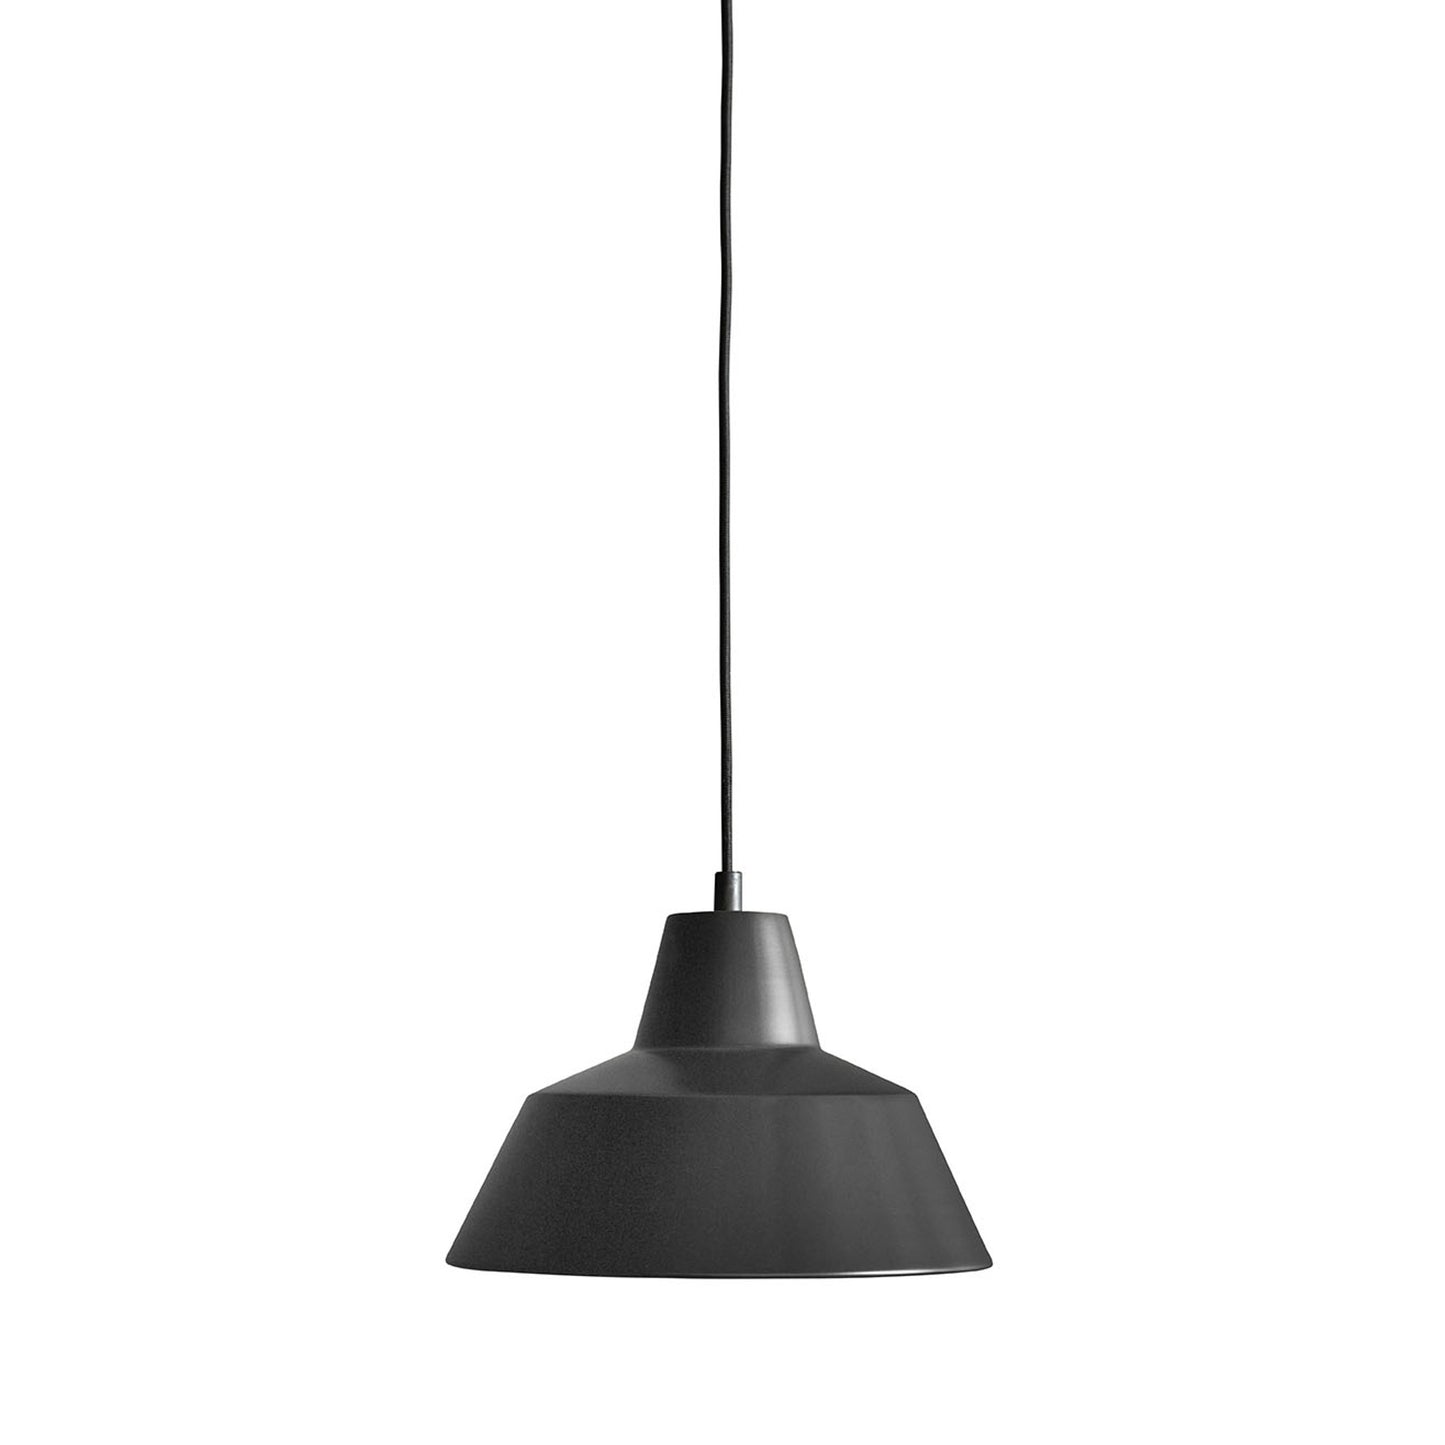 Workshop Lamp Pendant Lamp W2 by Made By Hand #Mat Black